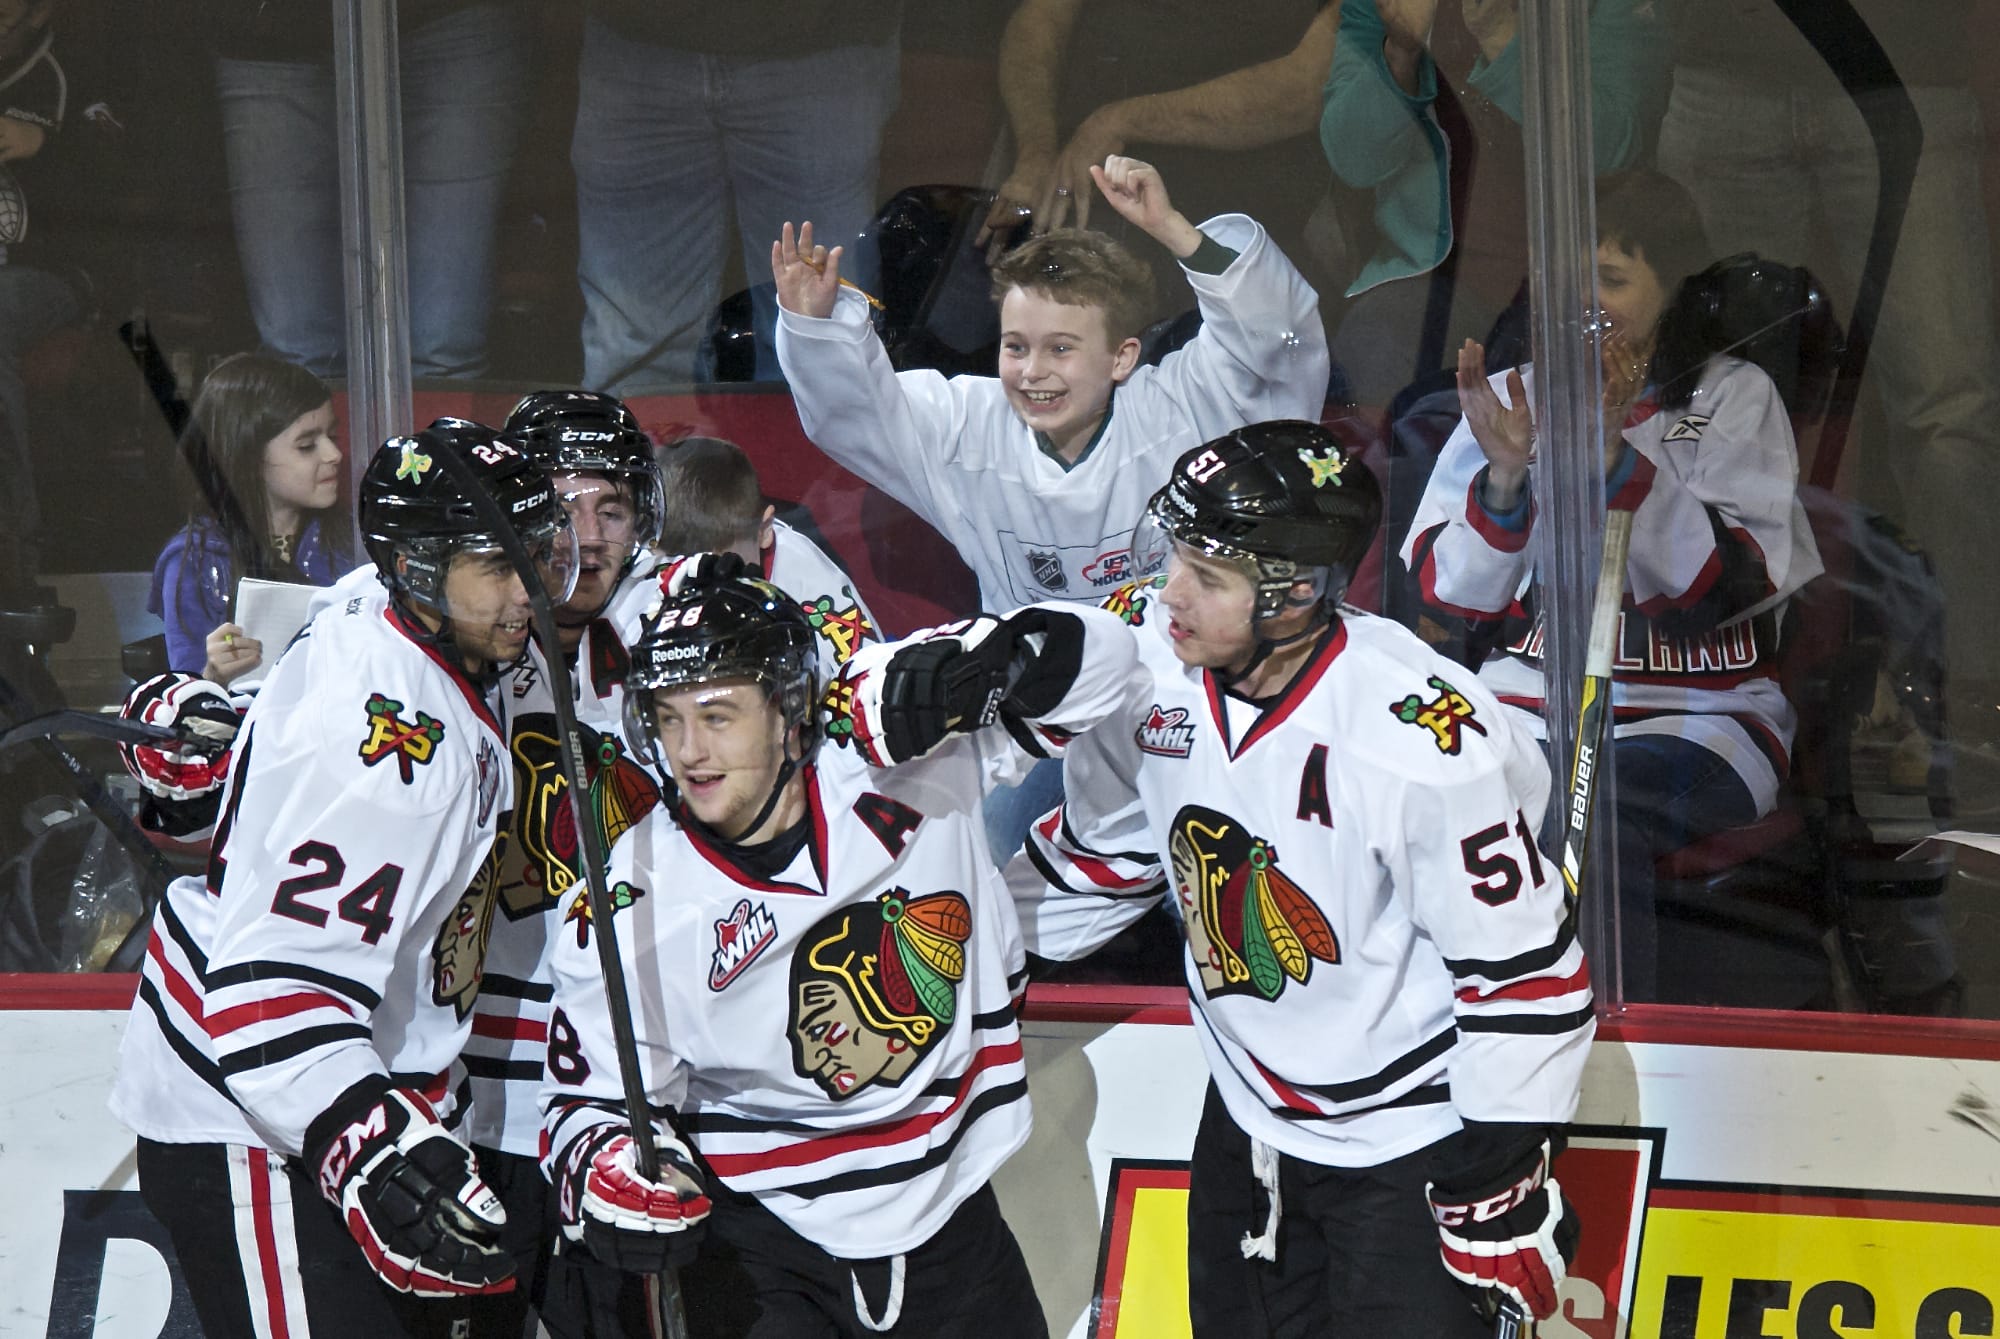 Winterhawks Brendan Leipsic, center, celebrates his first goal of the evening against the Vancouver Giants in the first period of game one of their best of seven series at the Moda Center on Friday March 21, 2014.